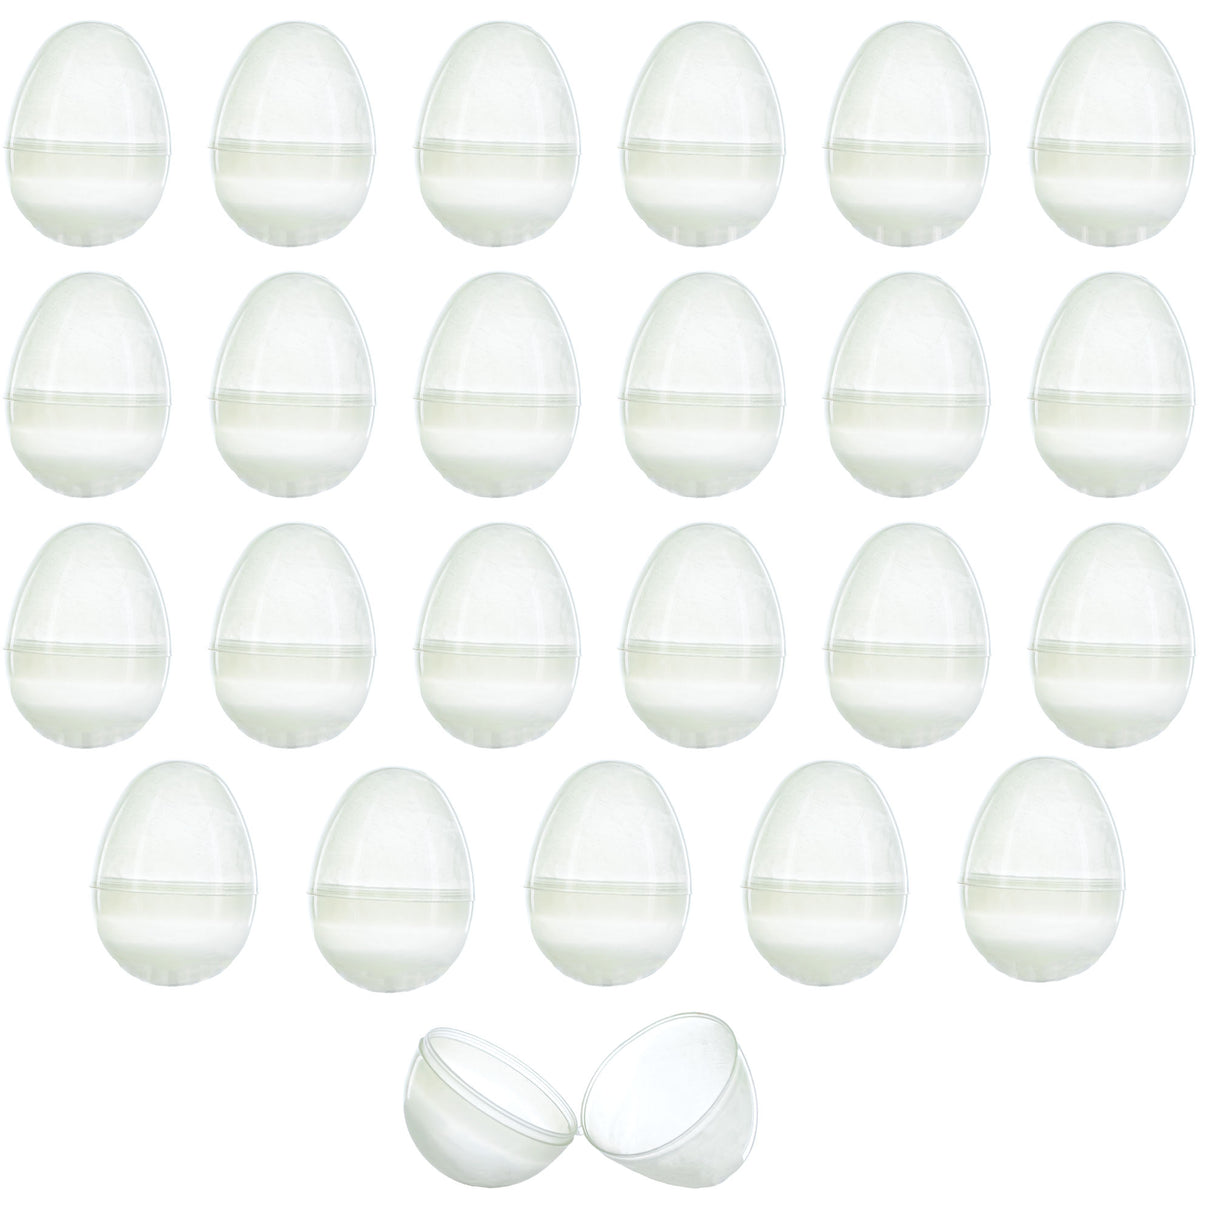 Glow in the Dark: Set of 24 Noctilucent Fillable Easter Eggs, Each 2.25 Inches in Multi color, Oval shape